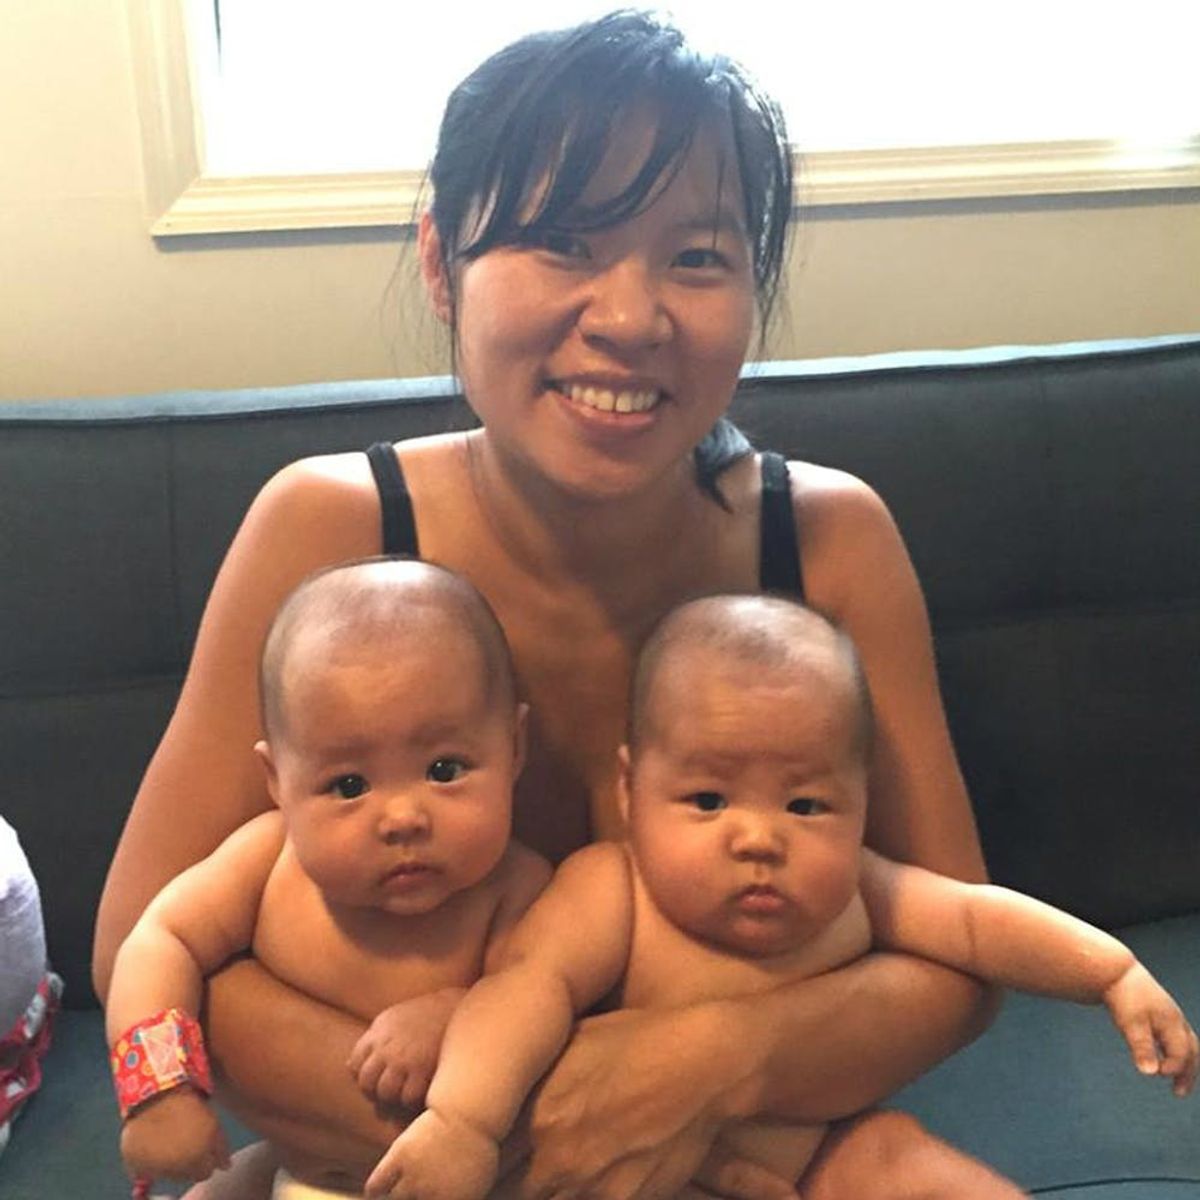 The Reason This Working Mother’s Breastfeeding Photo Is Going Viral Is Inspiring AF